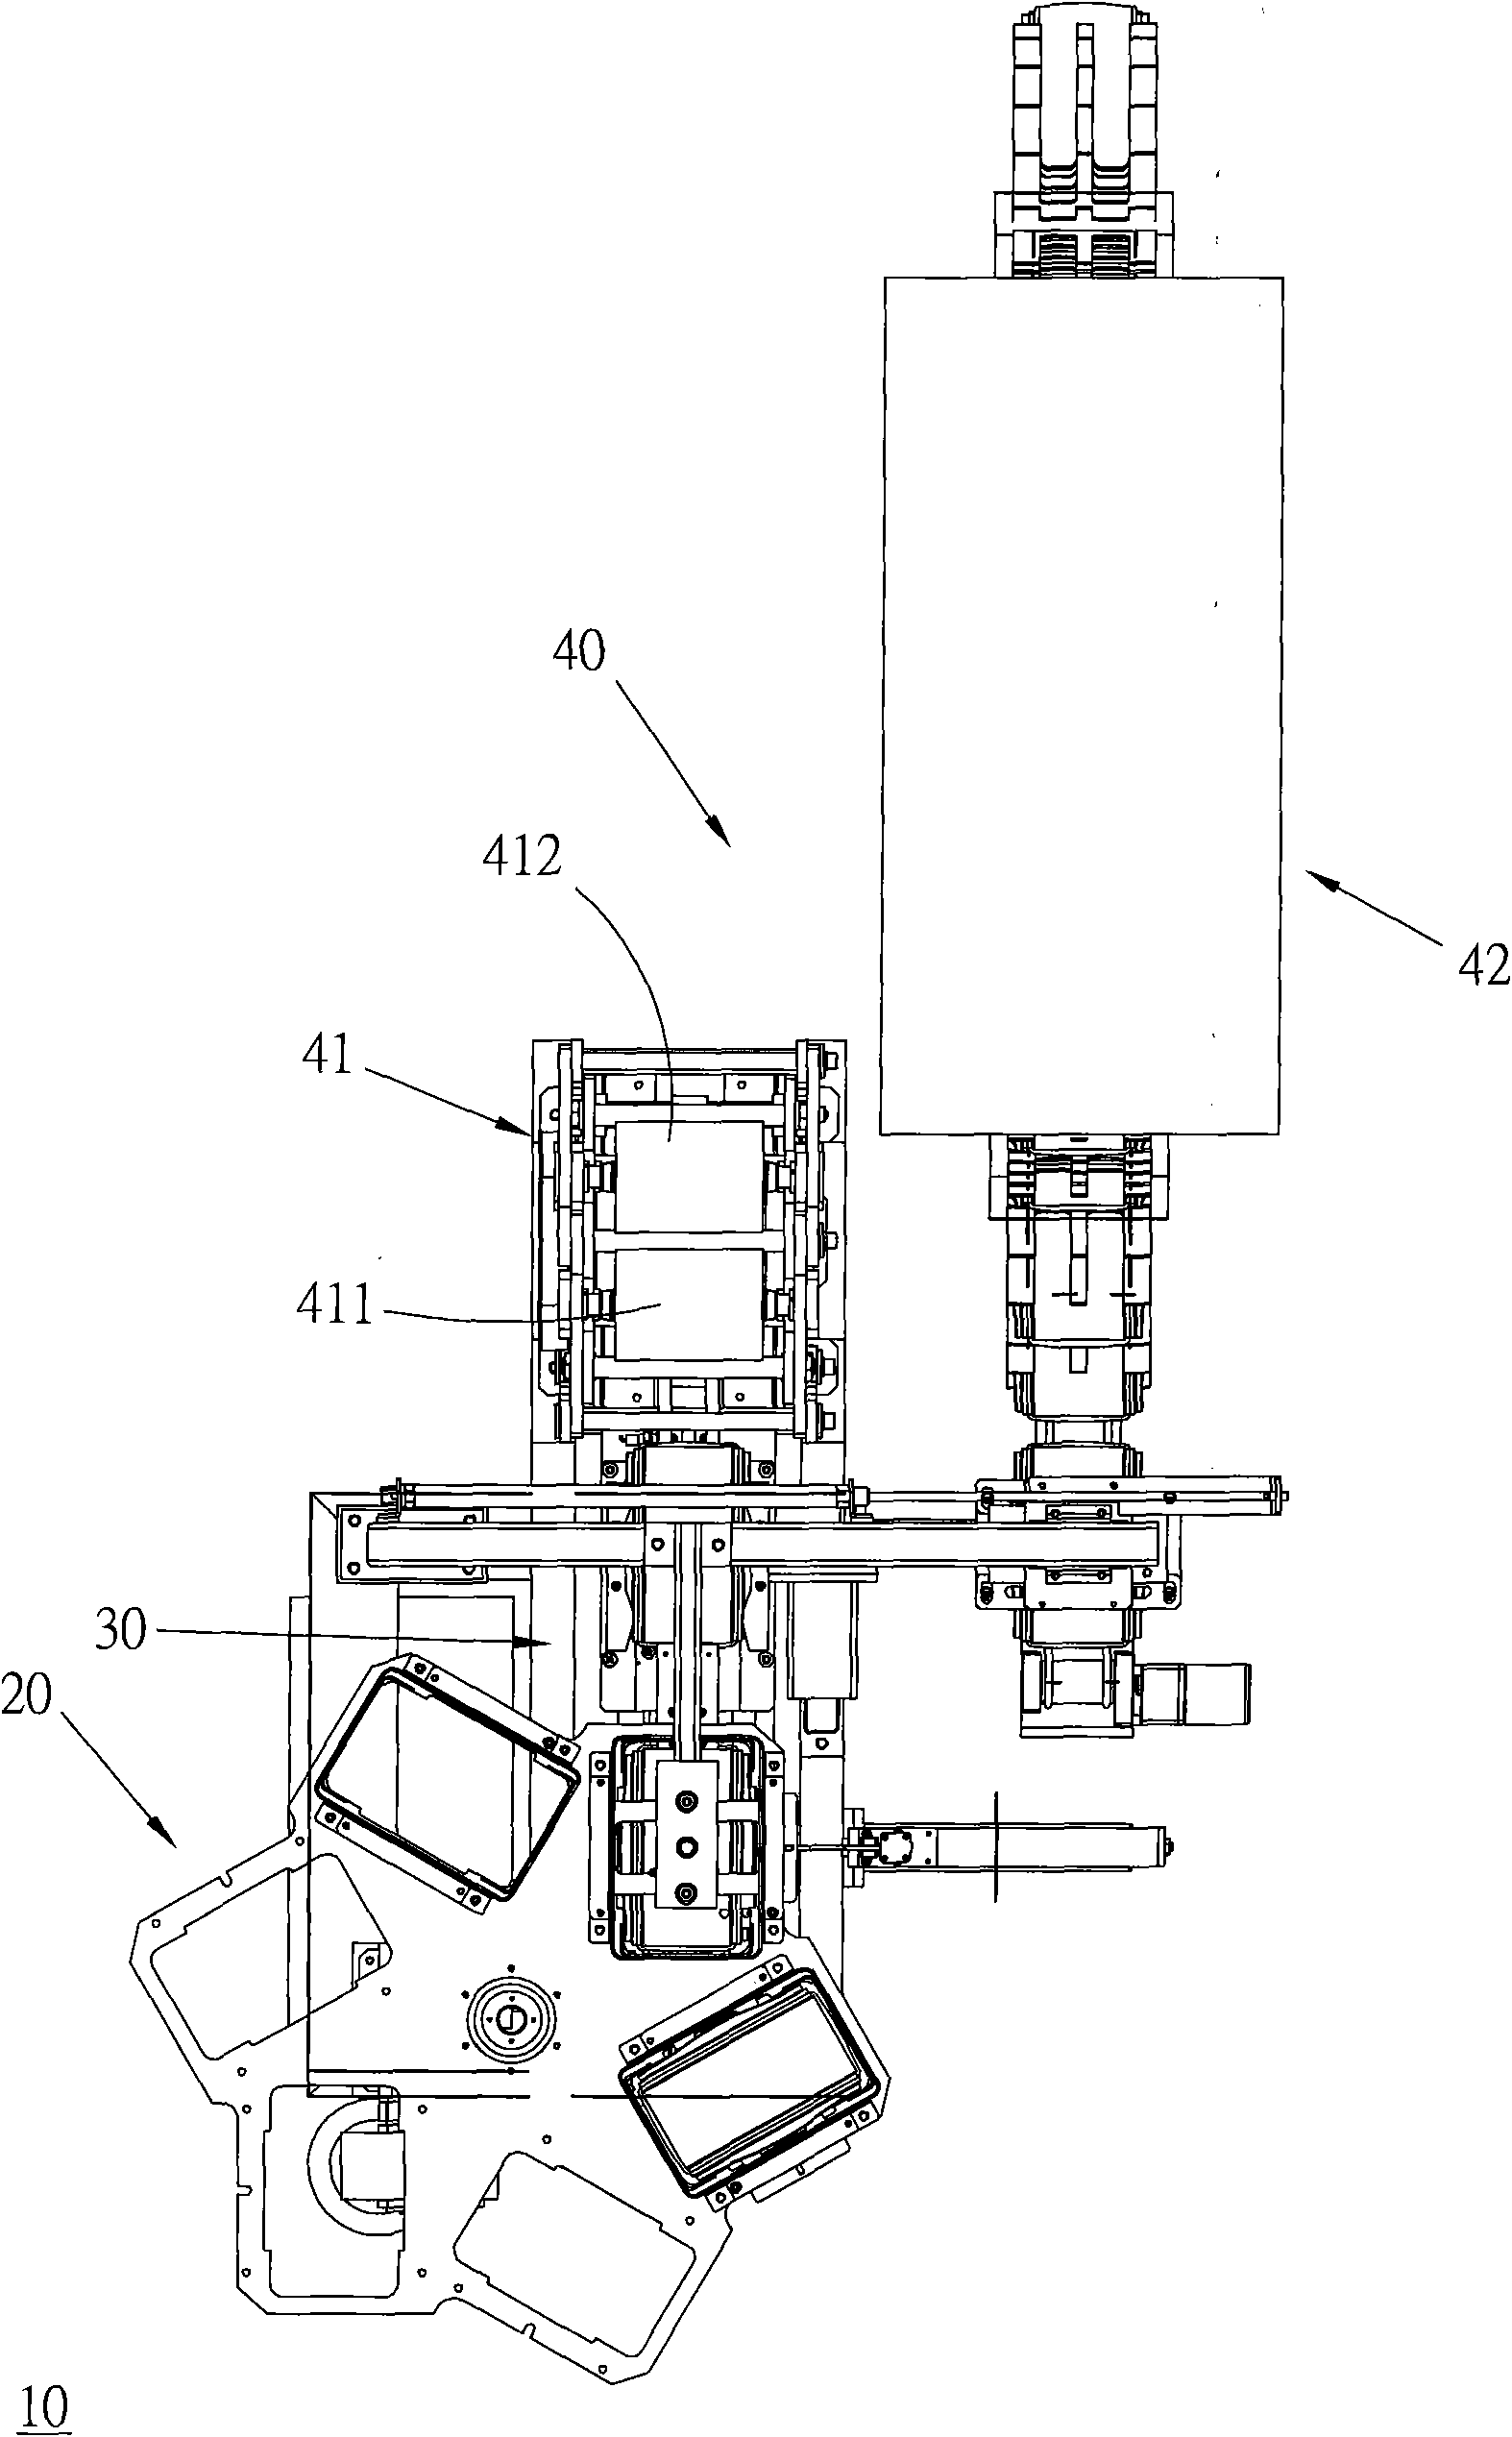 Method for size detection and post-treatment of sheeted molded polymer material and detection and post-treatment machine for implementing method